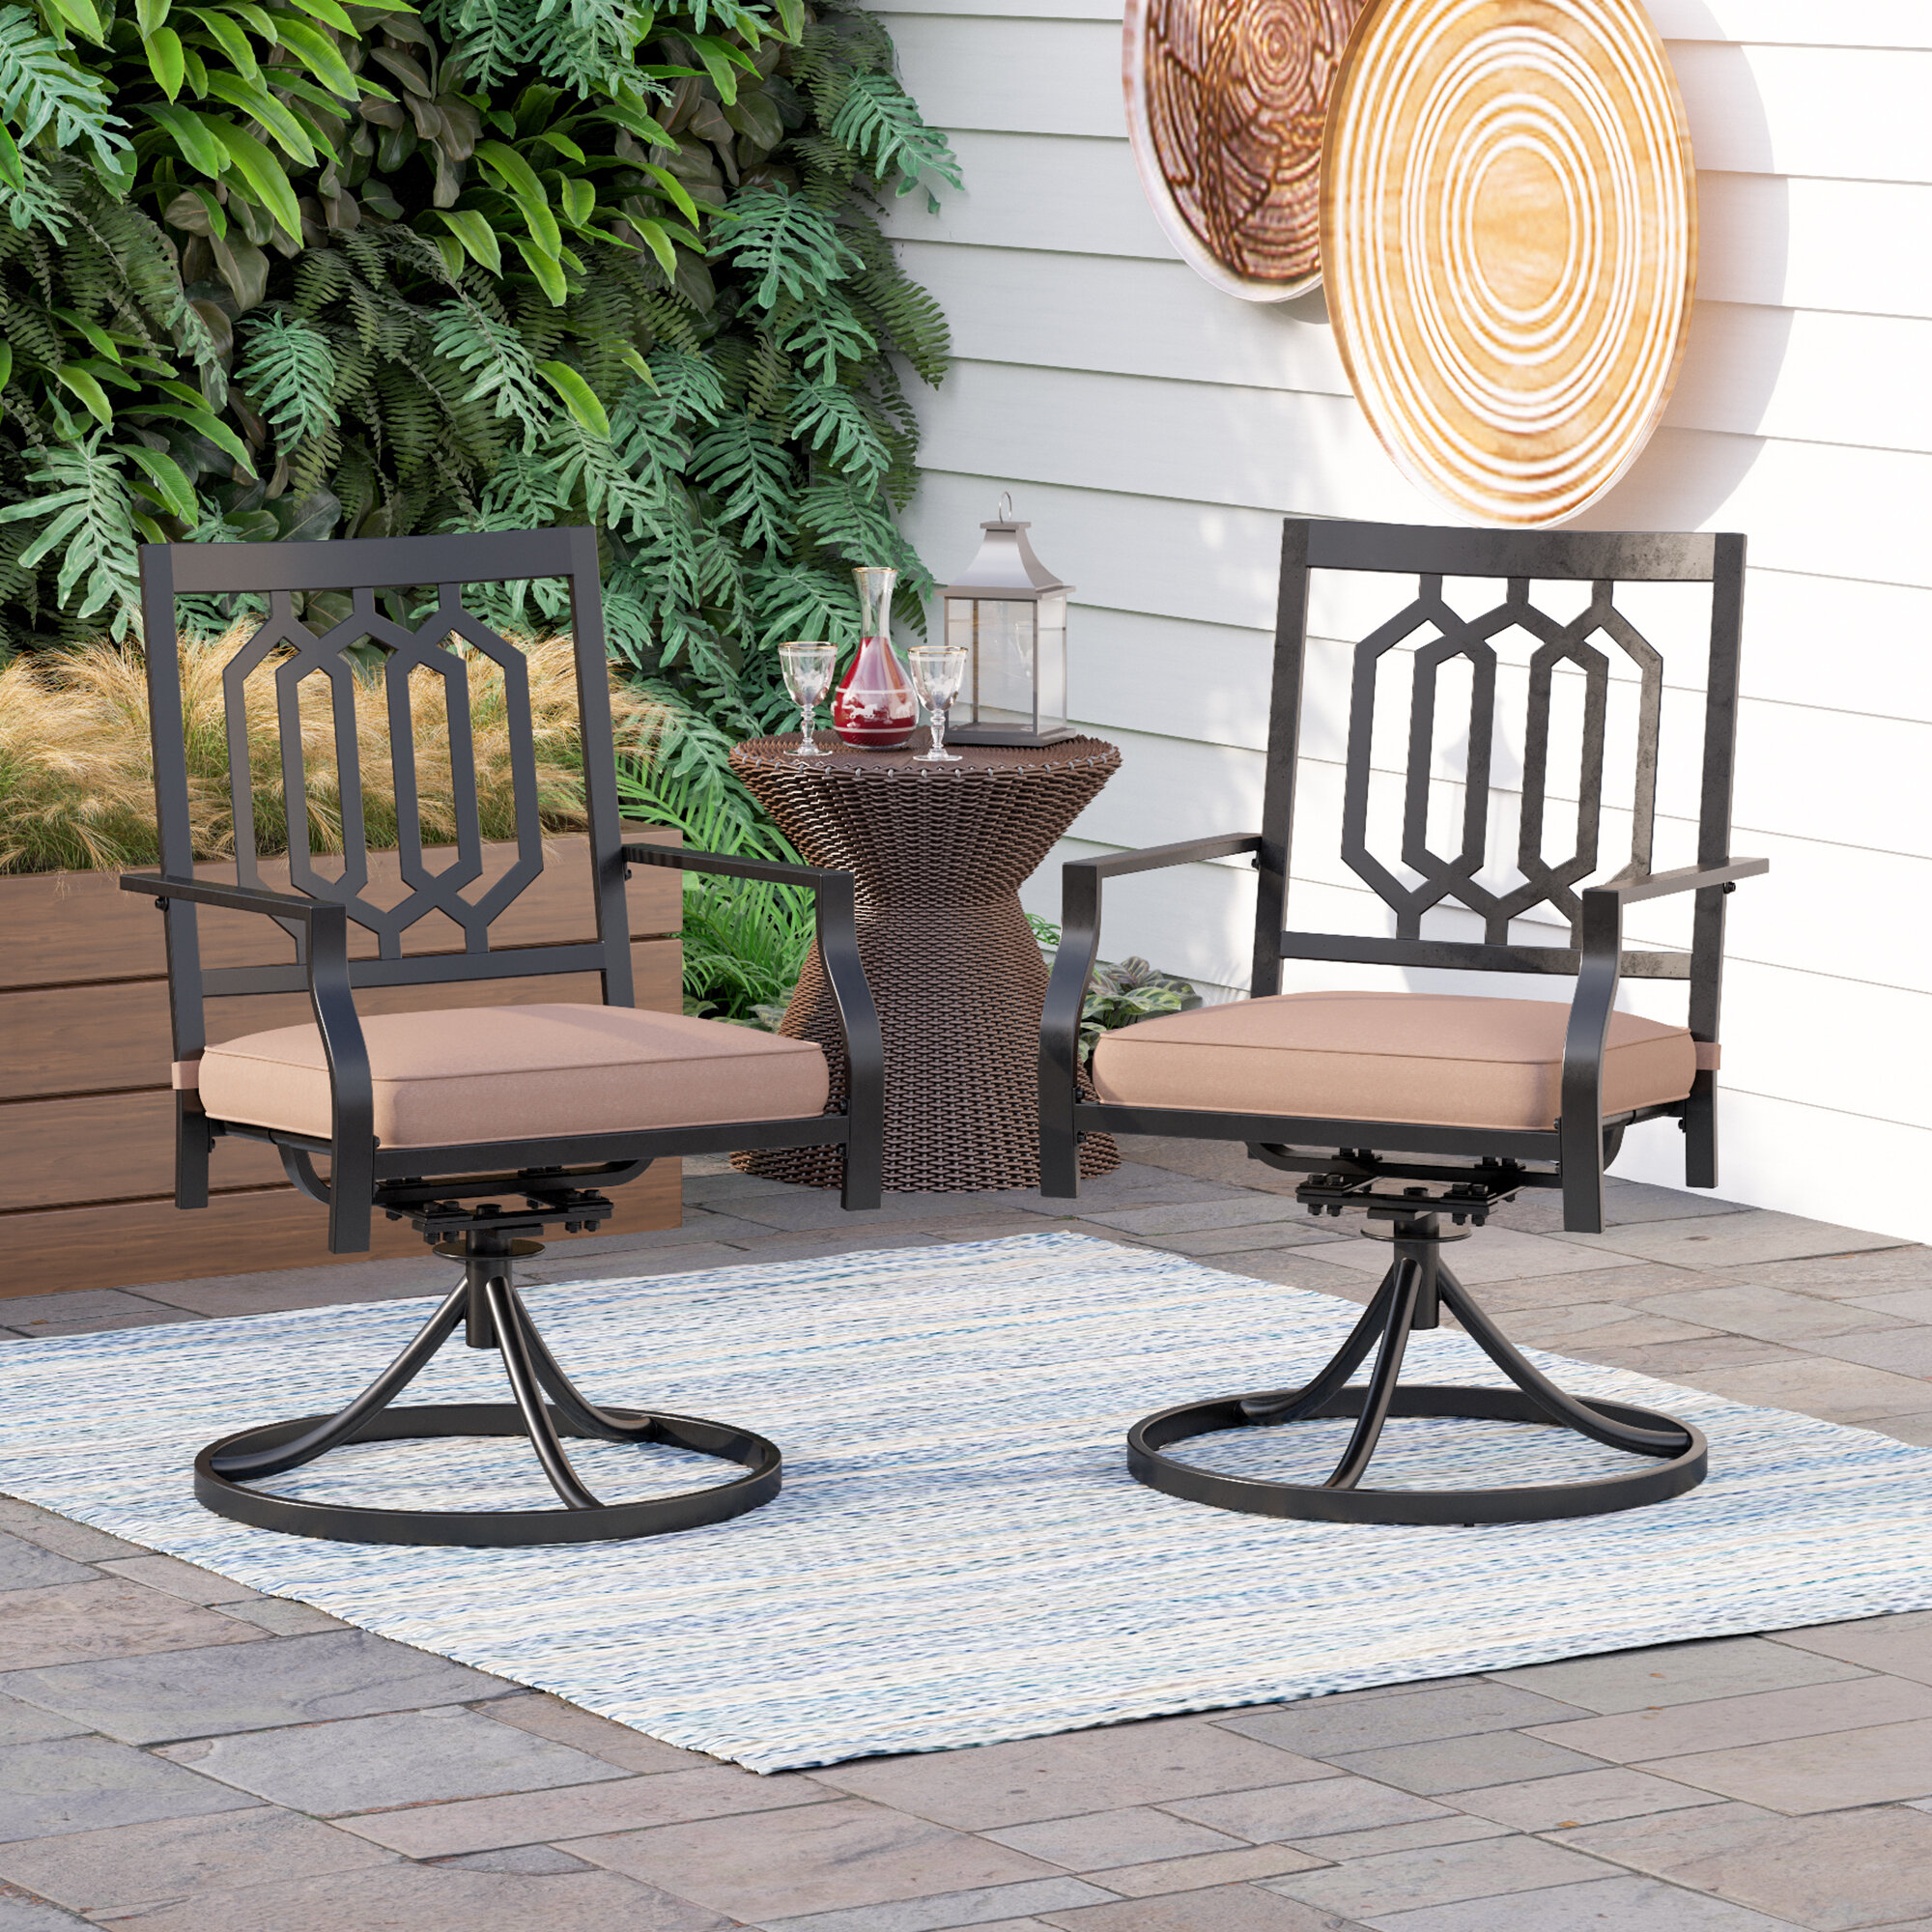  Comfy Hour Cast Iron Heavy Duty Super Strong Industrial  Strength Wheel Plant Stand Trolley, Black : Patio, Lawn & Garden